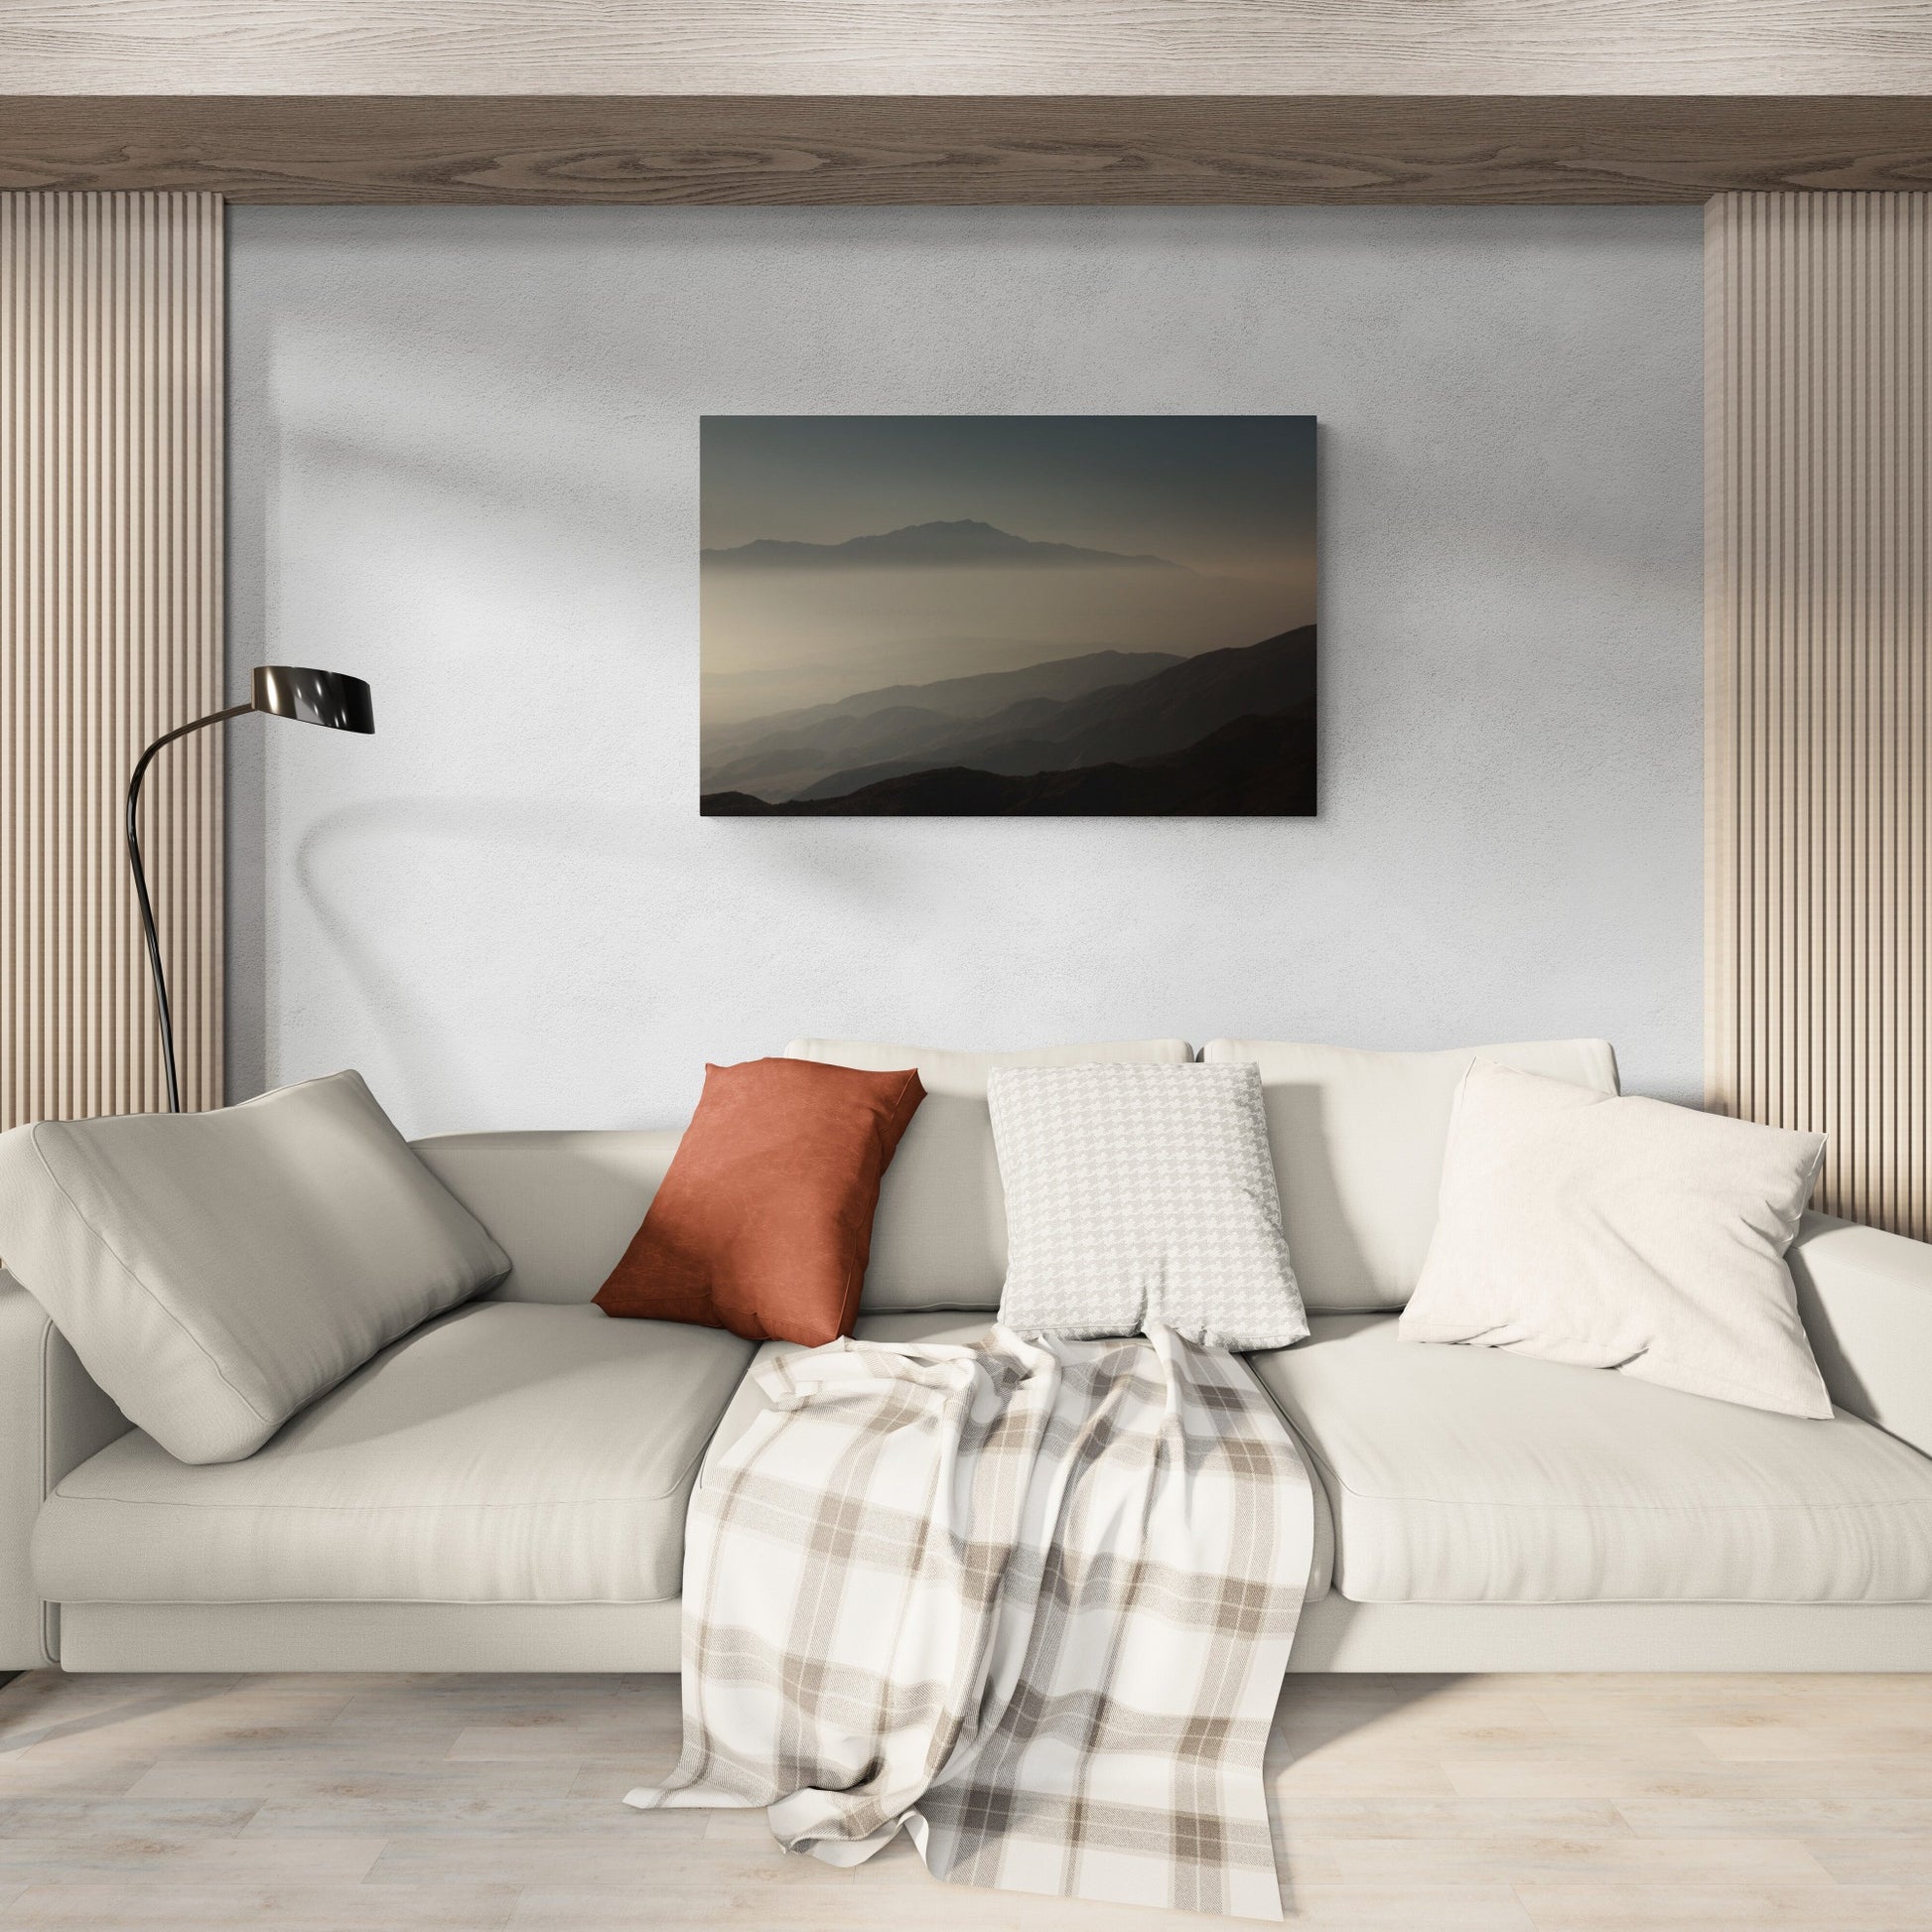 Canvas of a Photograph of California Mountains in a Living Room as wall art